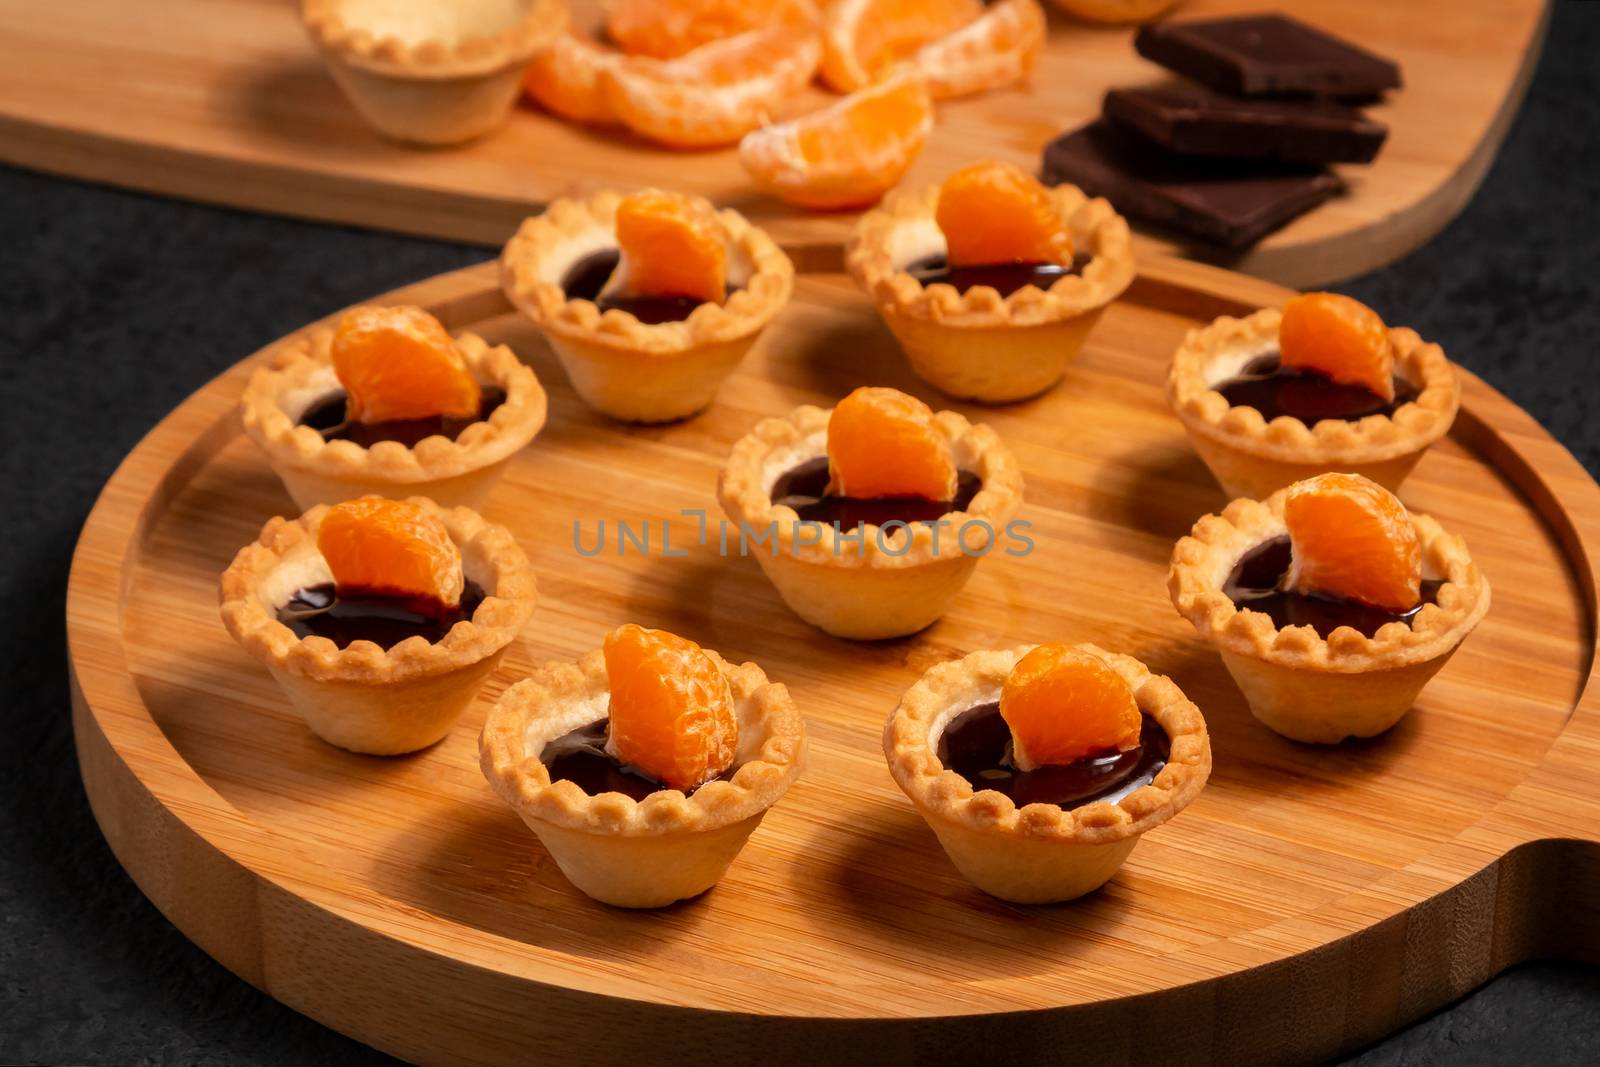 Sweet tartlets with chocolate and slices of tangerine on a wooden dish for serving.